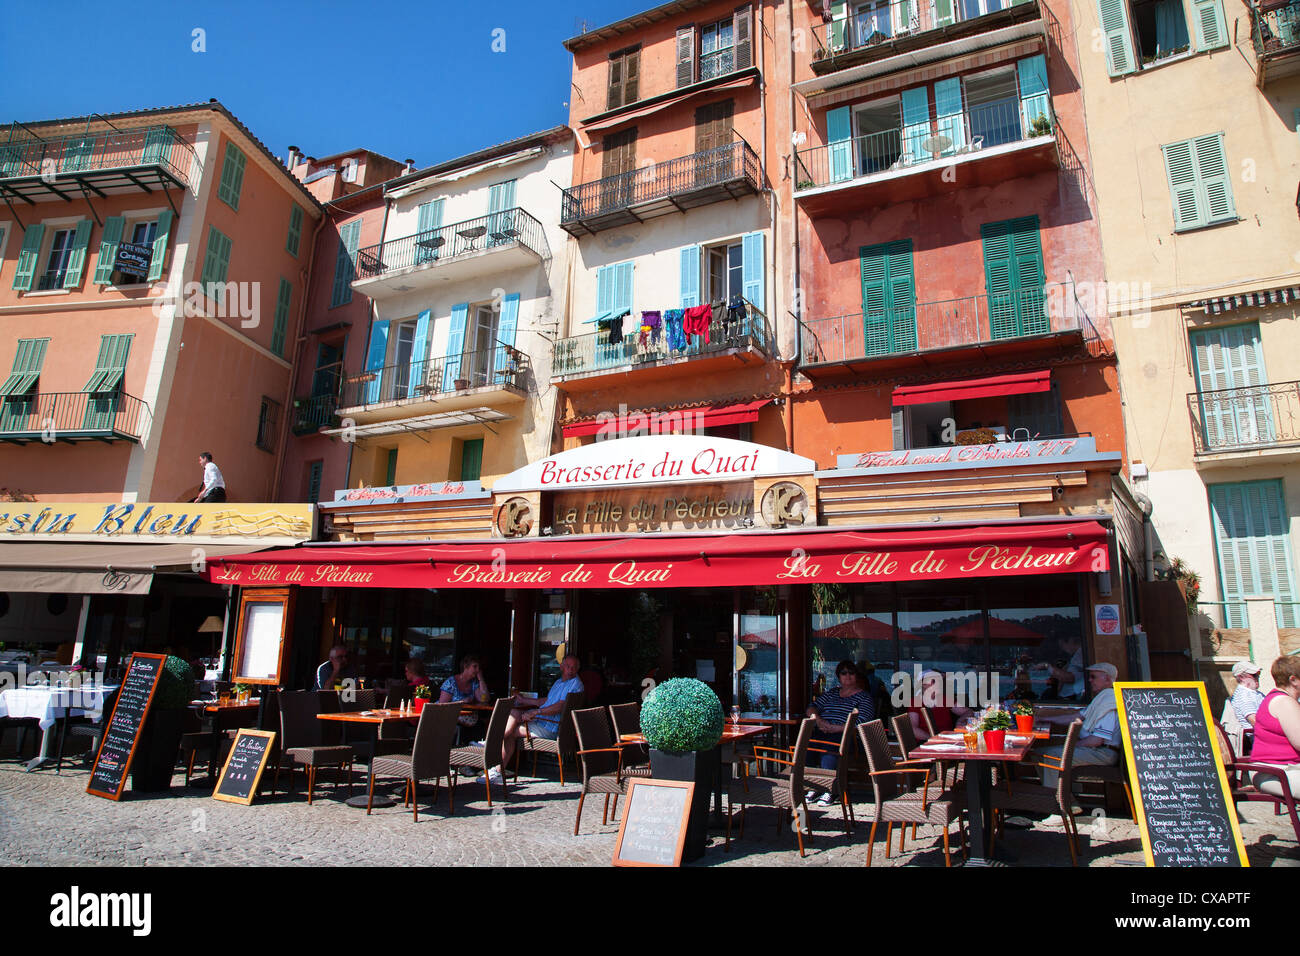 Facade of restaurants along waterfront, Villefranche, Alpes-Maritimes, Provence-Alpes-Cote d'Azur, French Riviera, France Stock Photo